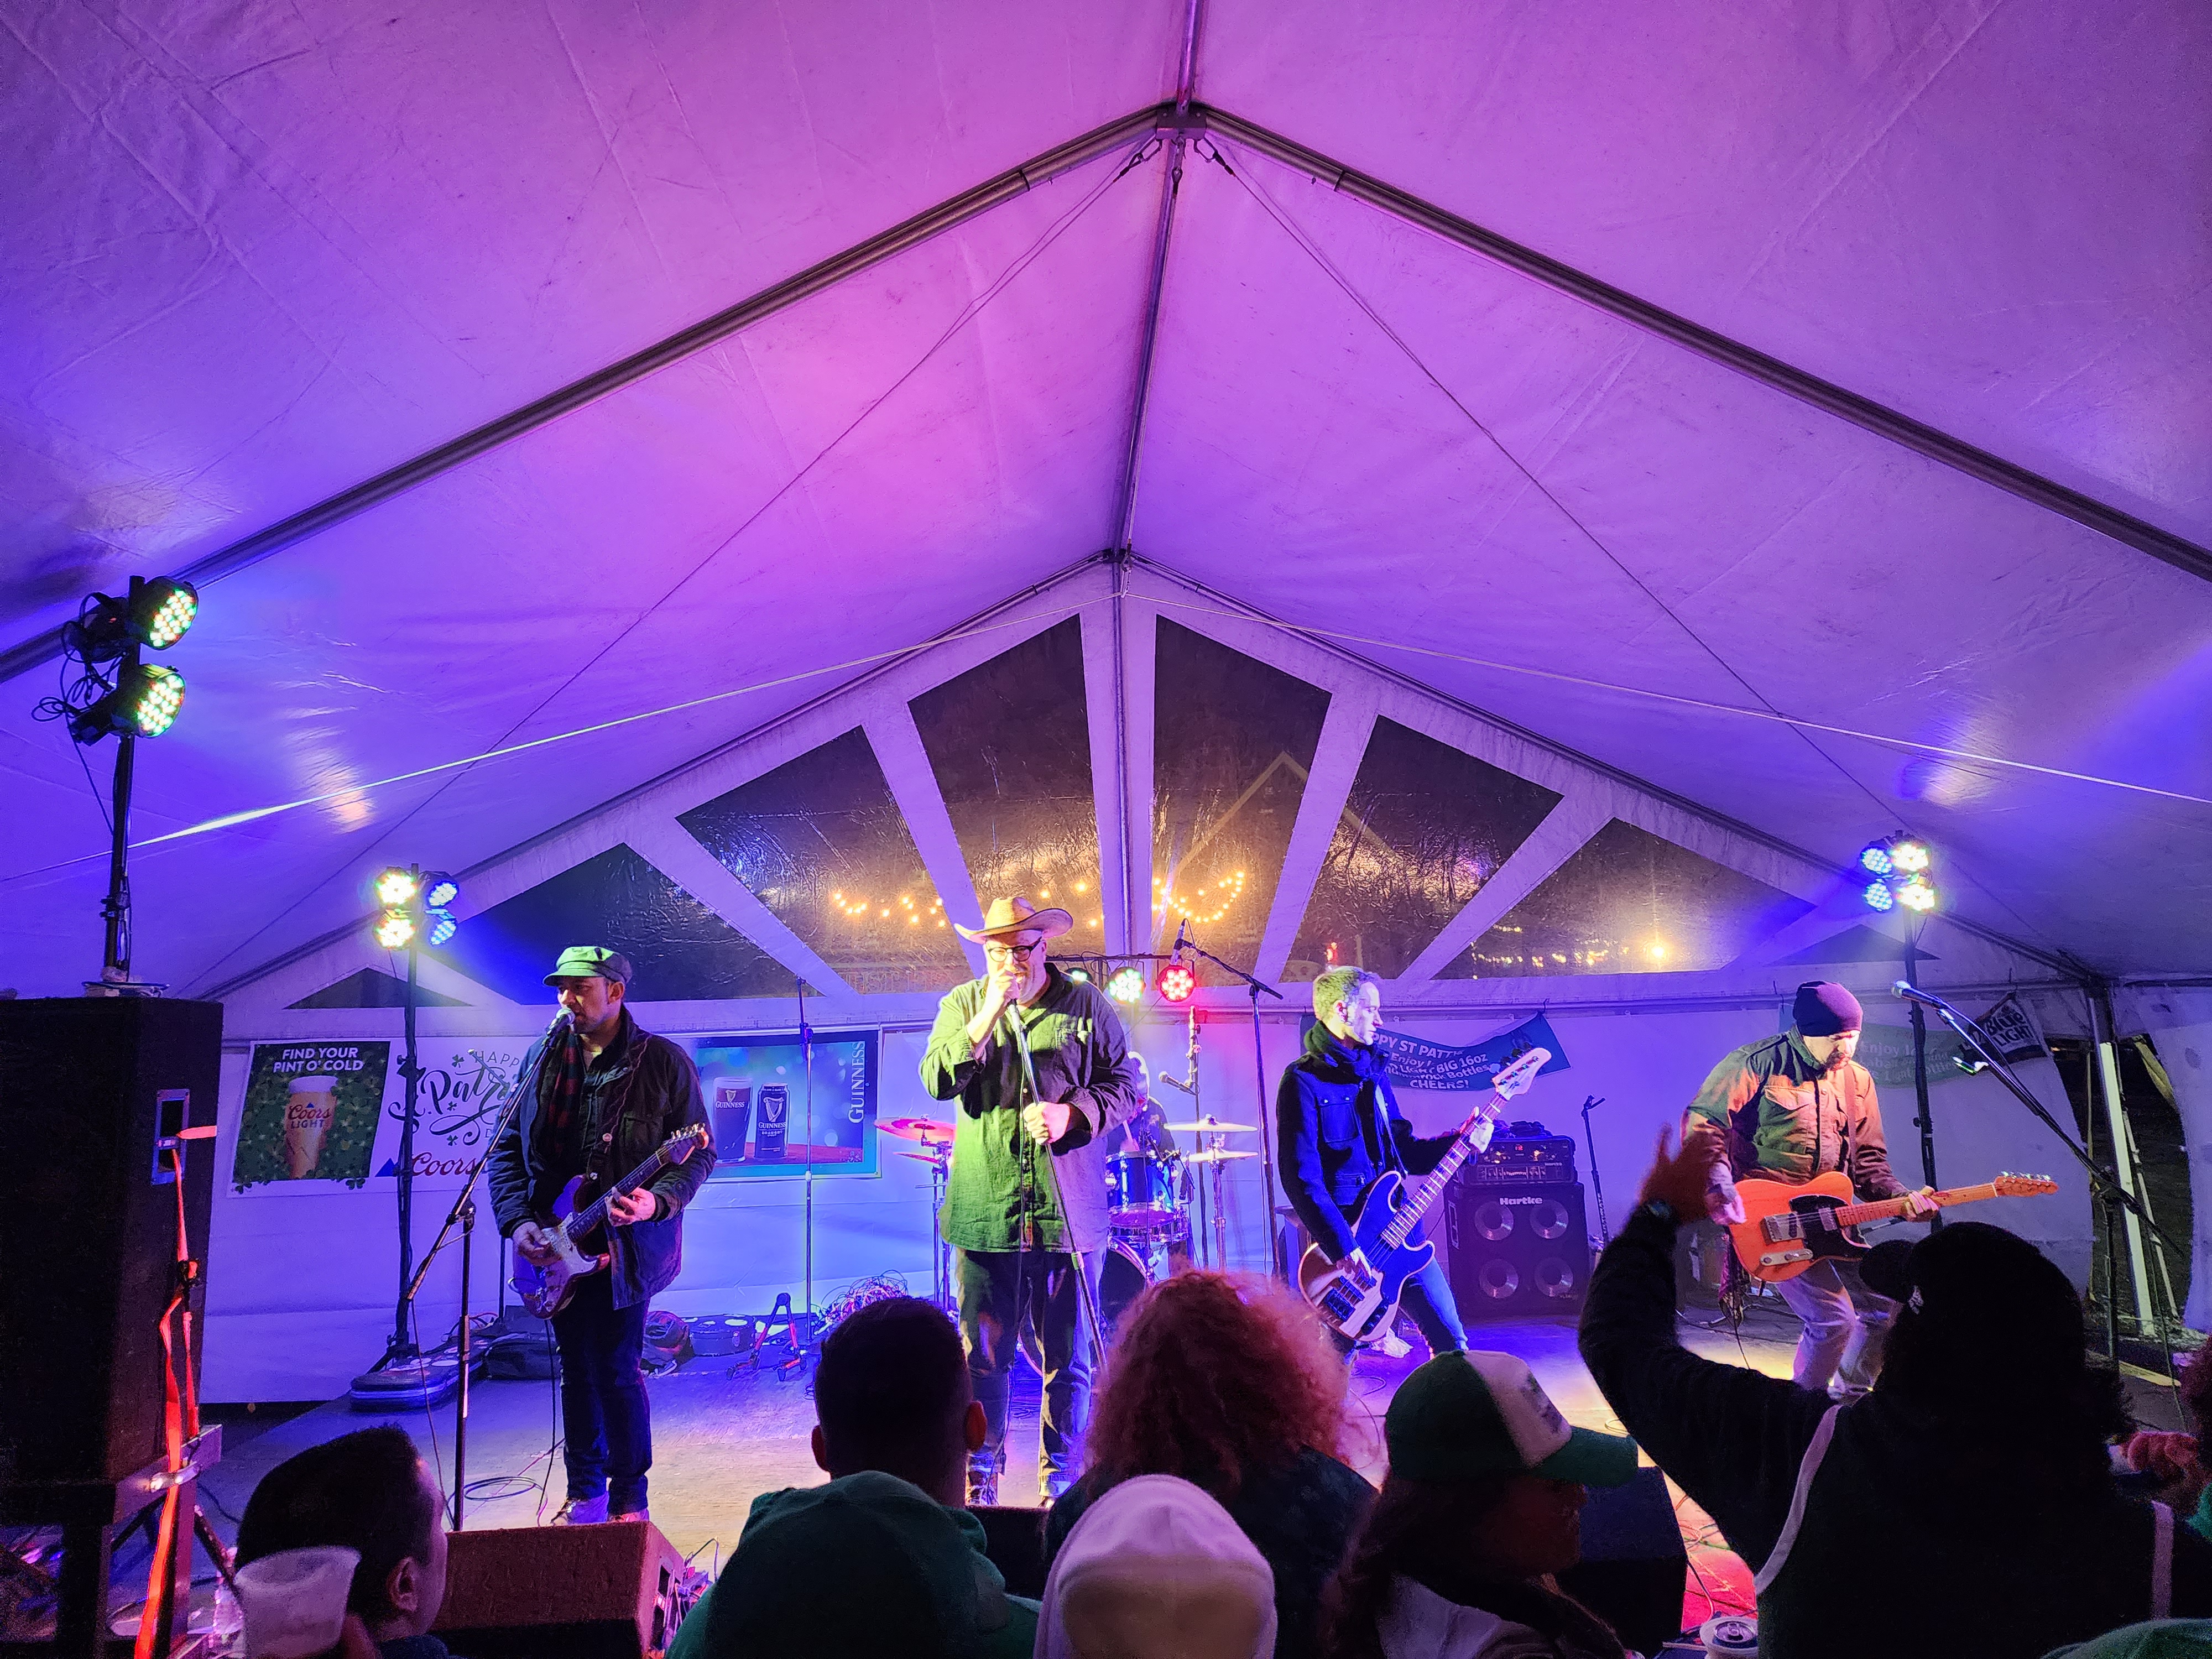 four musicians perform on stage inside a large tent with a crowd below them